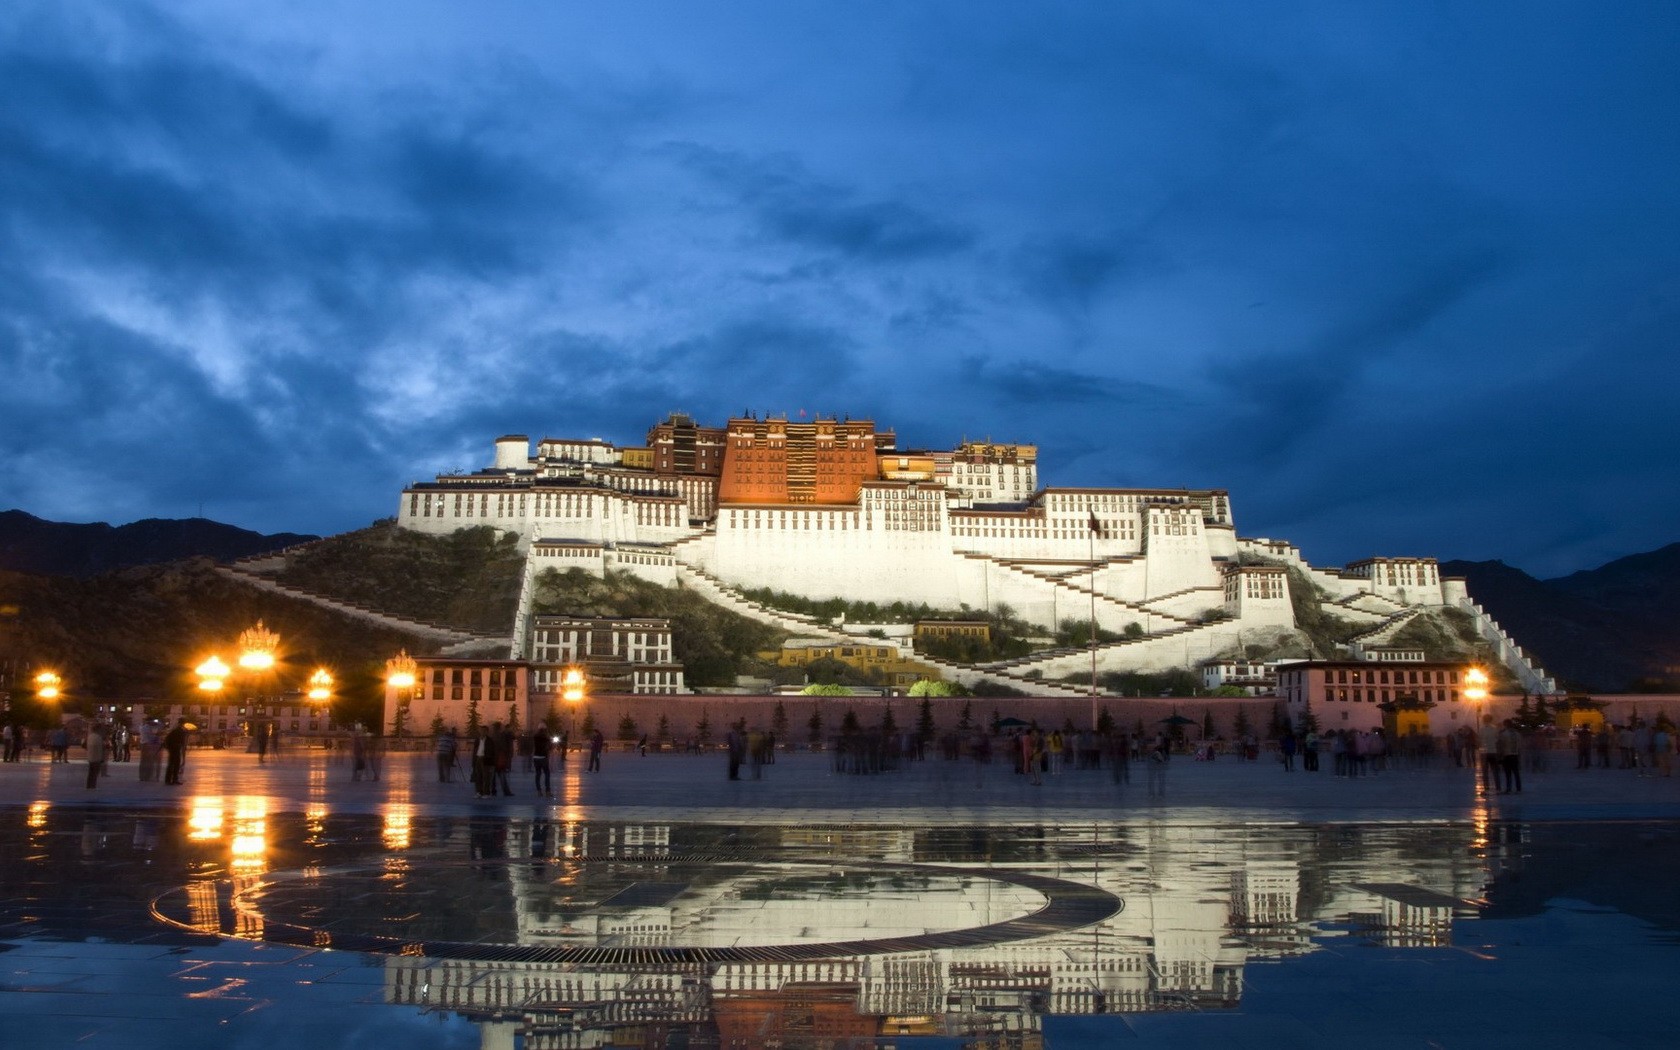 Buddhism Architecture Tibet Potala Palace Palace Evening Hills Stairs Clouds Lights Rock Town Square 1680x1050